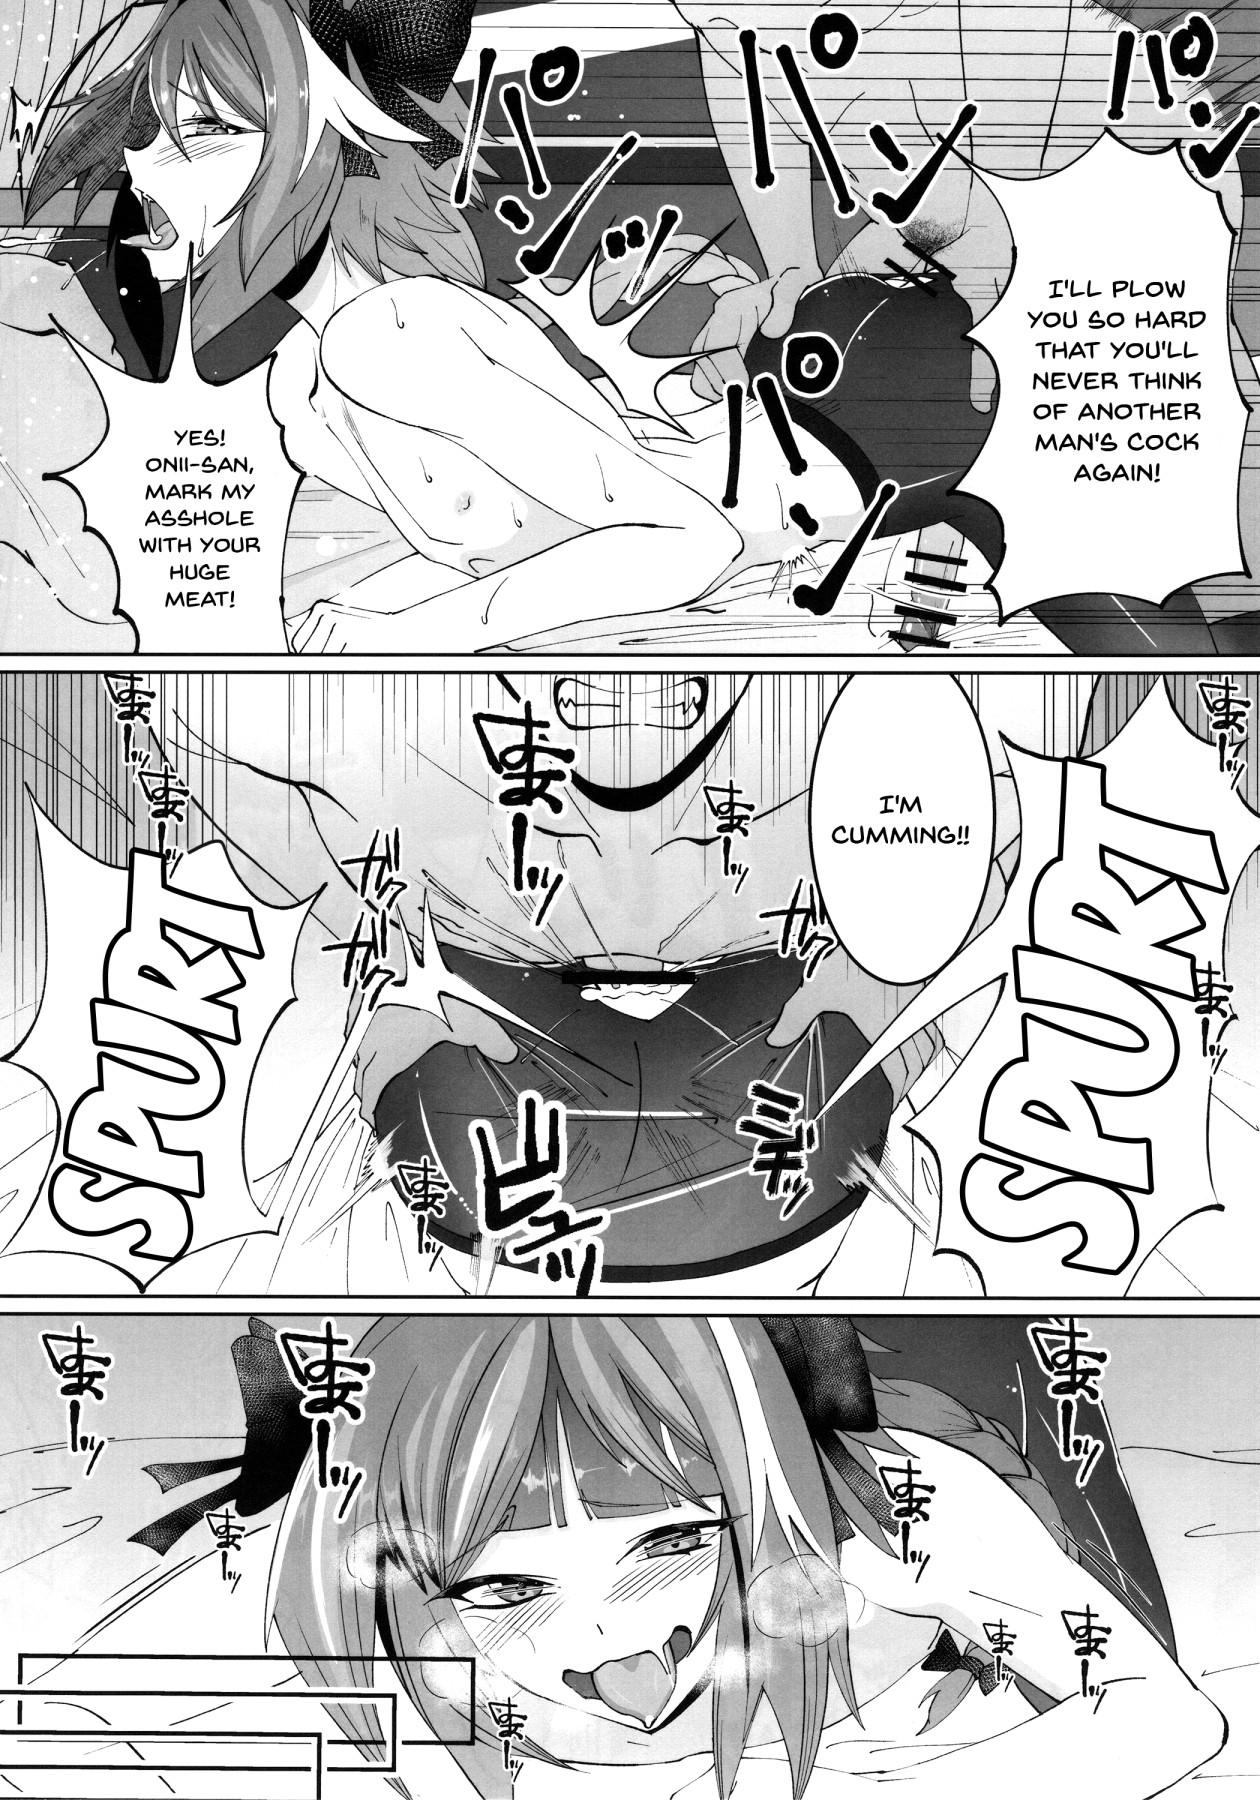 Boyfriend Deal With The Devil - Fate grand order Stepsiblings - Page 15